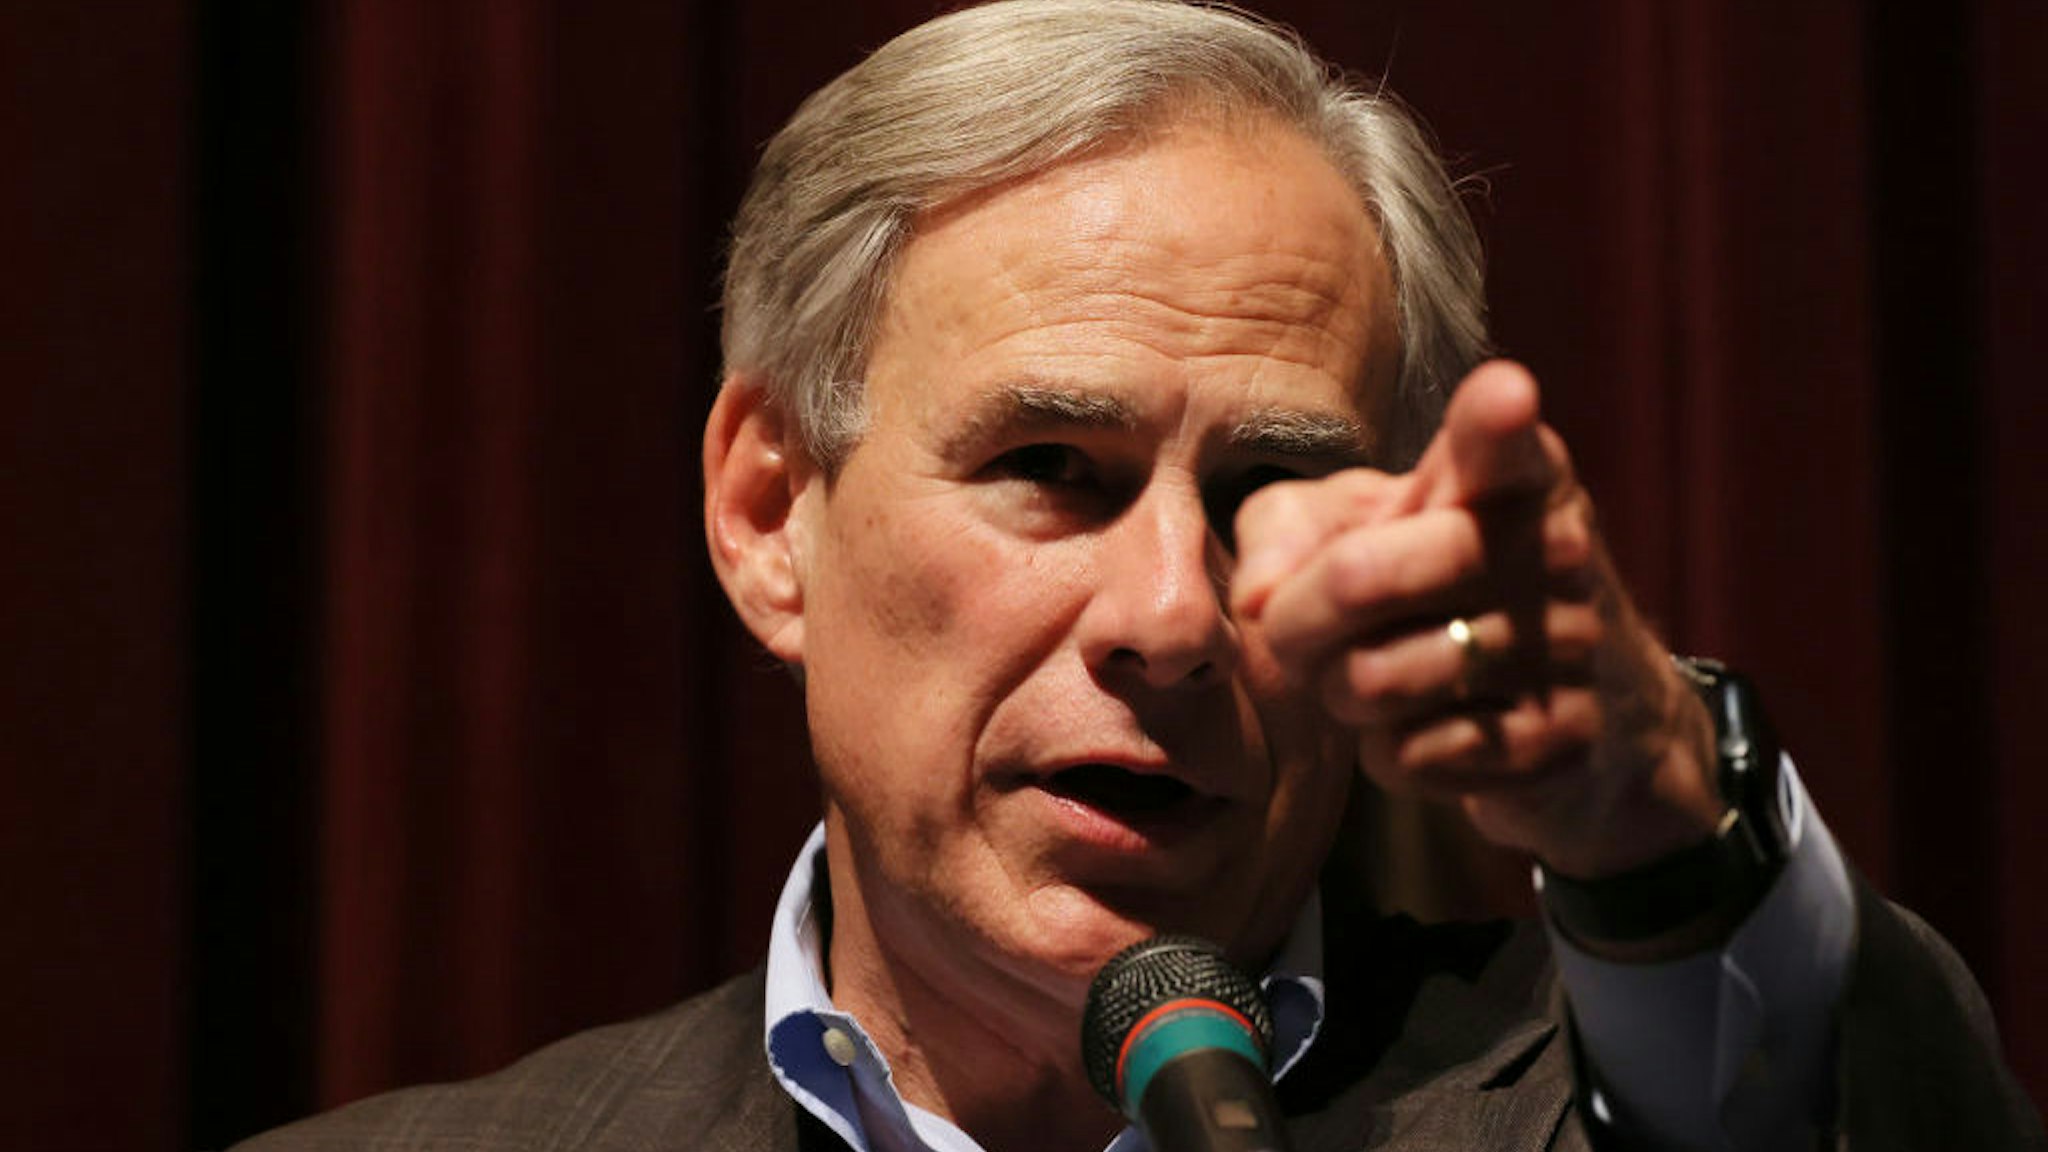 UVALDE, TEXAS - MAY 27: Governor Greg Abbott points to a reporter during a press conference about the mass shooting at Uvalde High School on May 27, 2022 in Uvalde, Texas. Abbott held a press conference to give an update on the resources the state will be providing to everyone affected by Tuesday's mass shooting where 19 children and two adults were killed at Robb Elementary School. Abbott expressed his anger about being misled about law enforcements response to the shooting. (Photo by Michael M. Santiago/Getty Images)